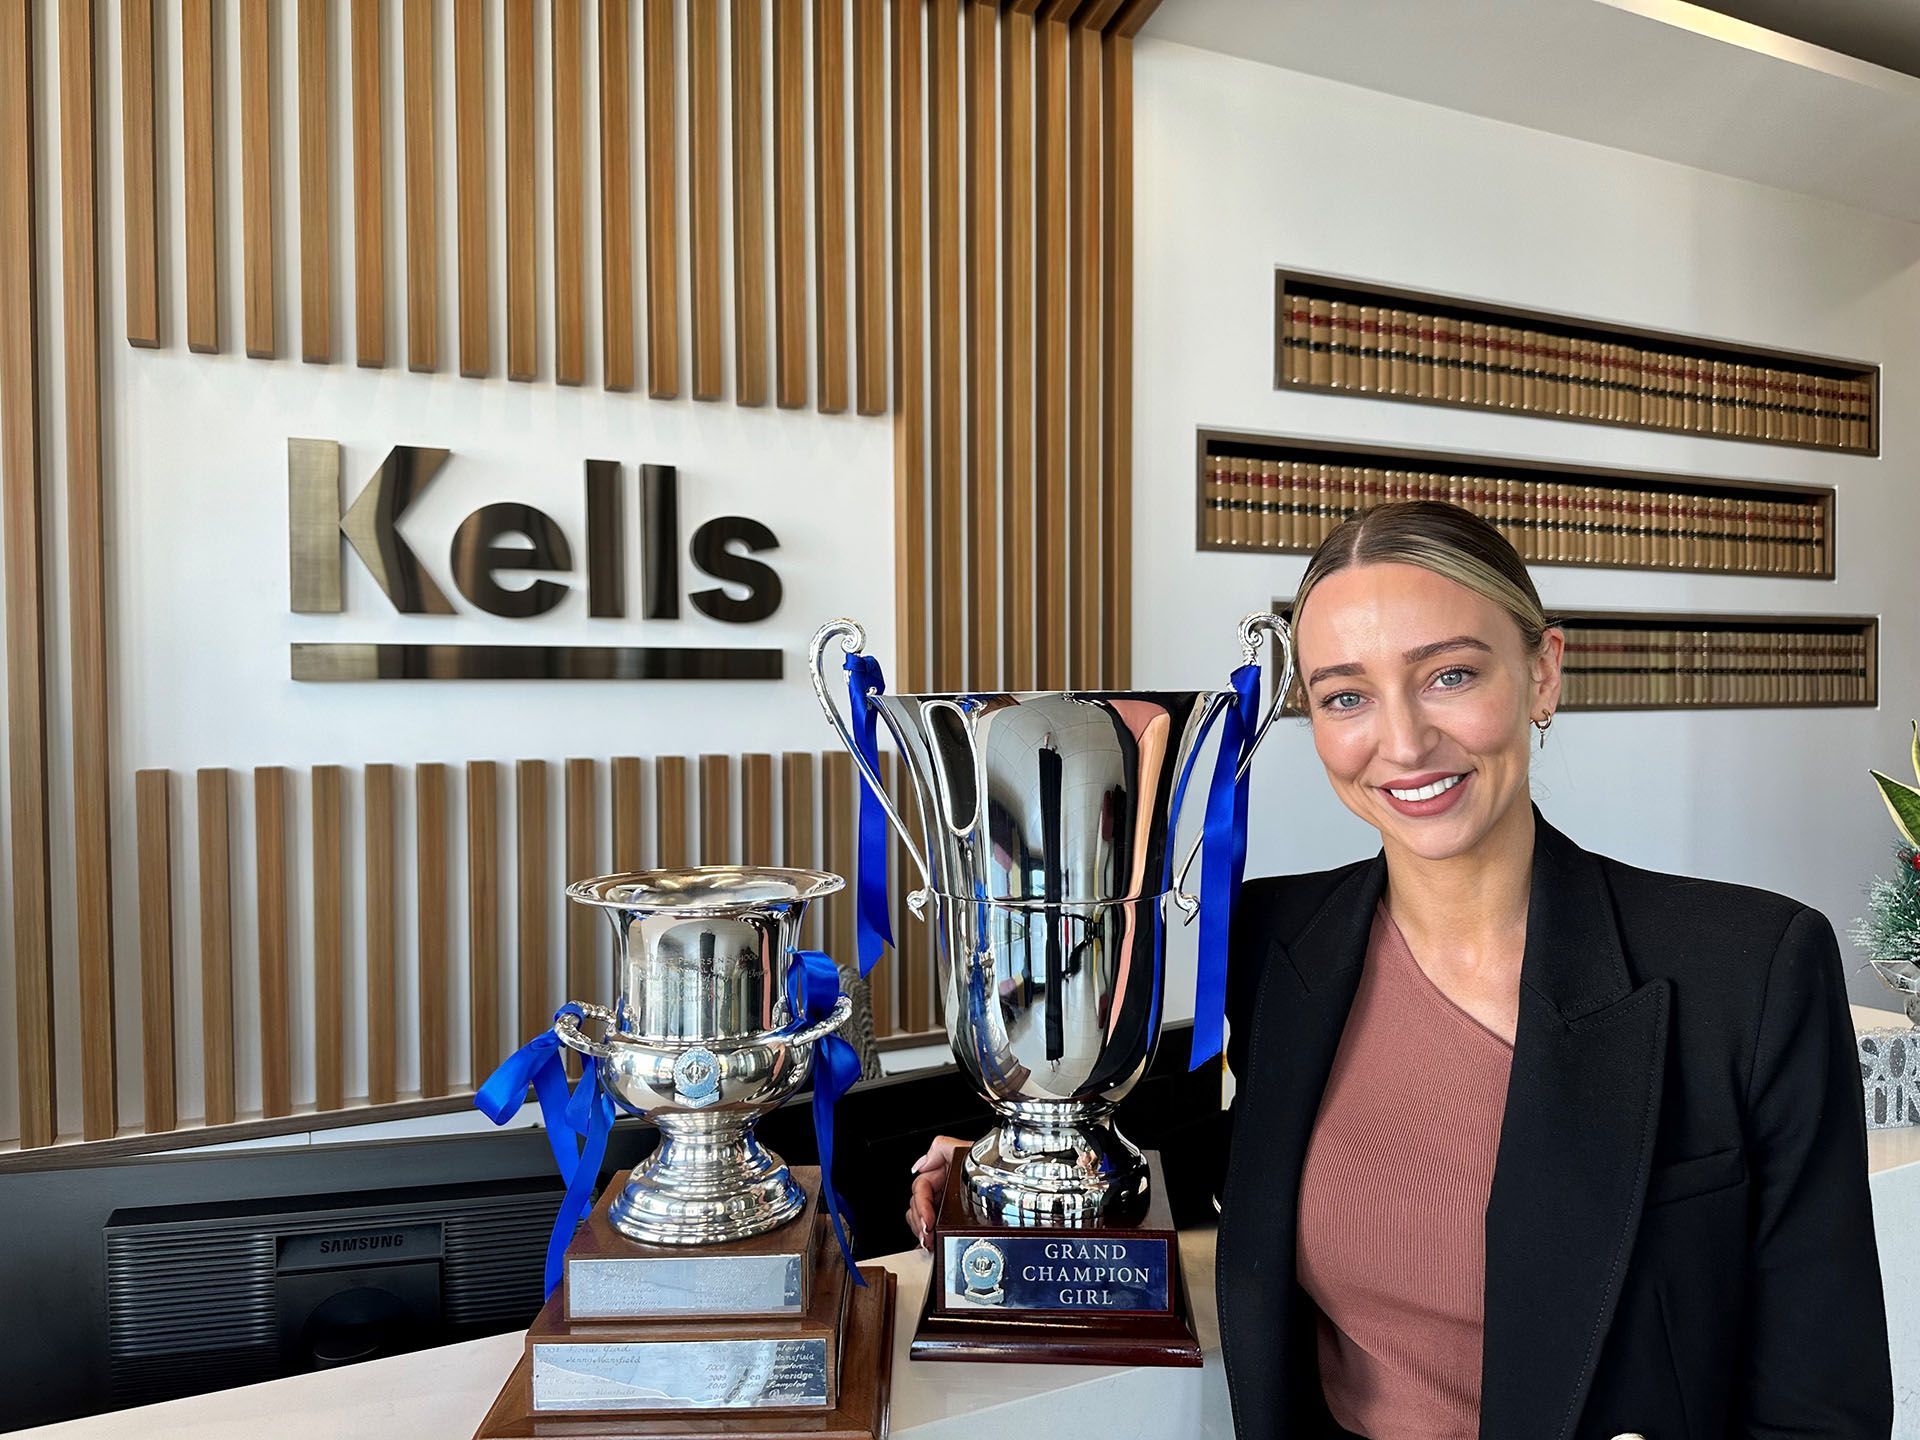 Ashleigh Barry holding two trophies in front of a Kells sign